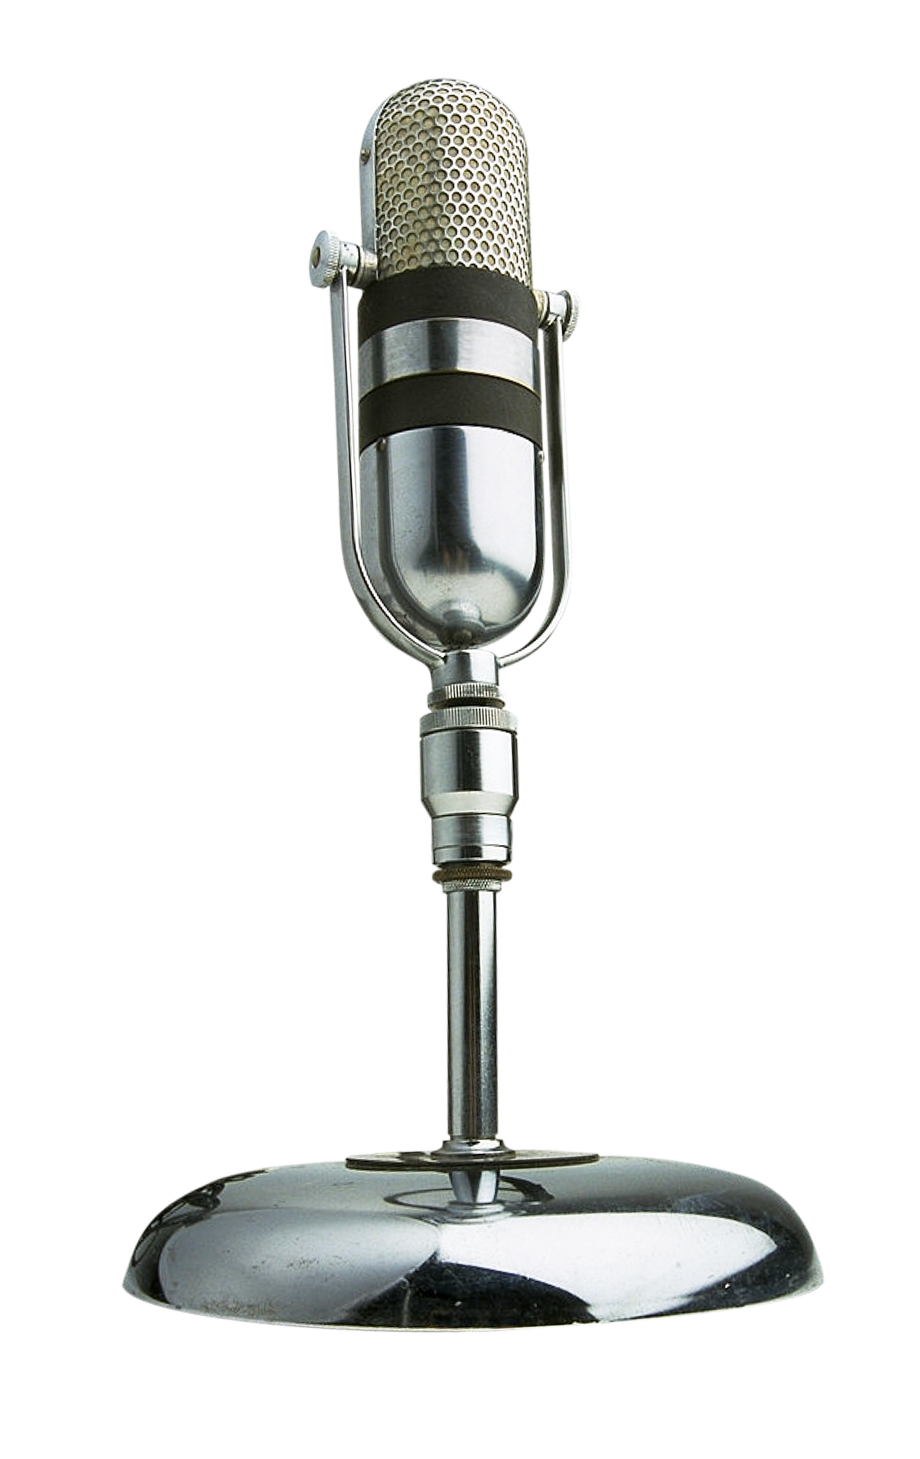 microphone png transparent